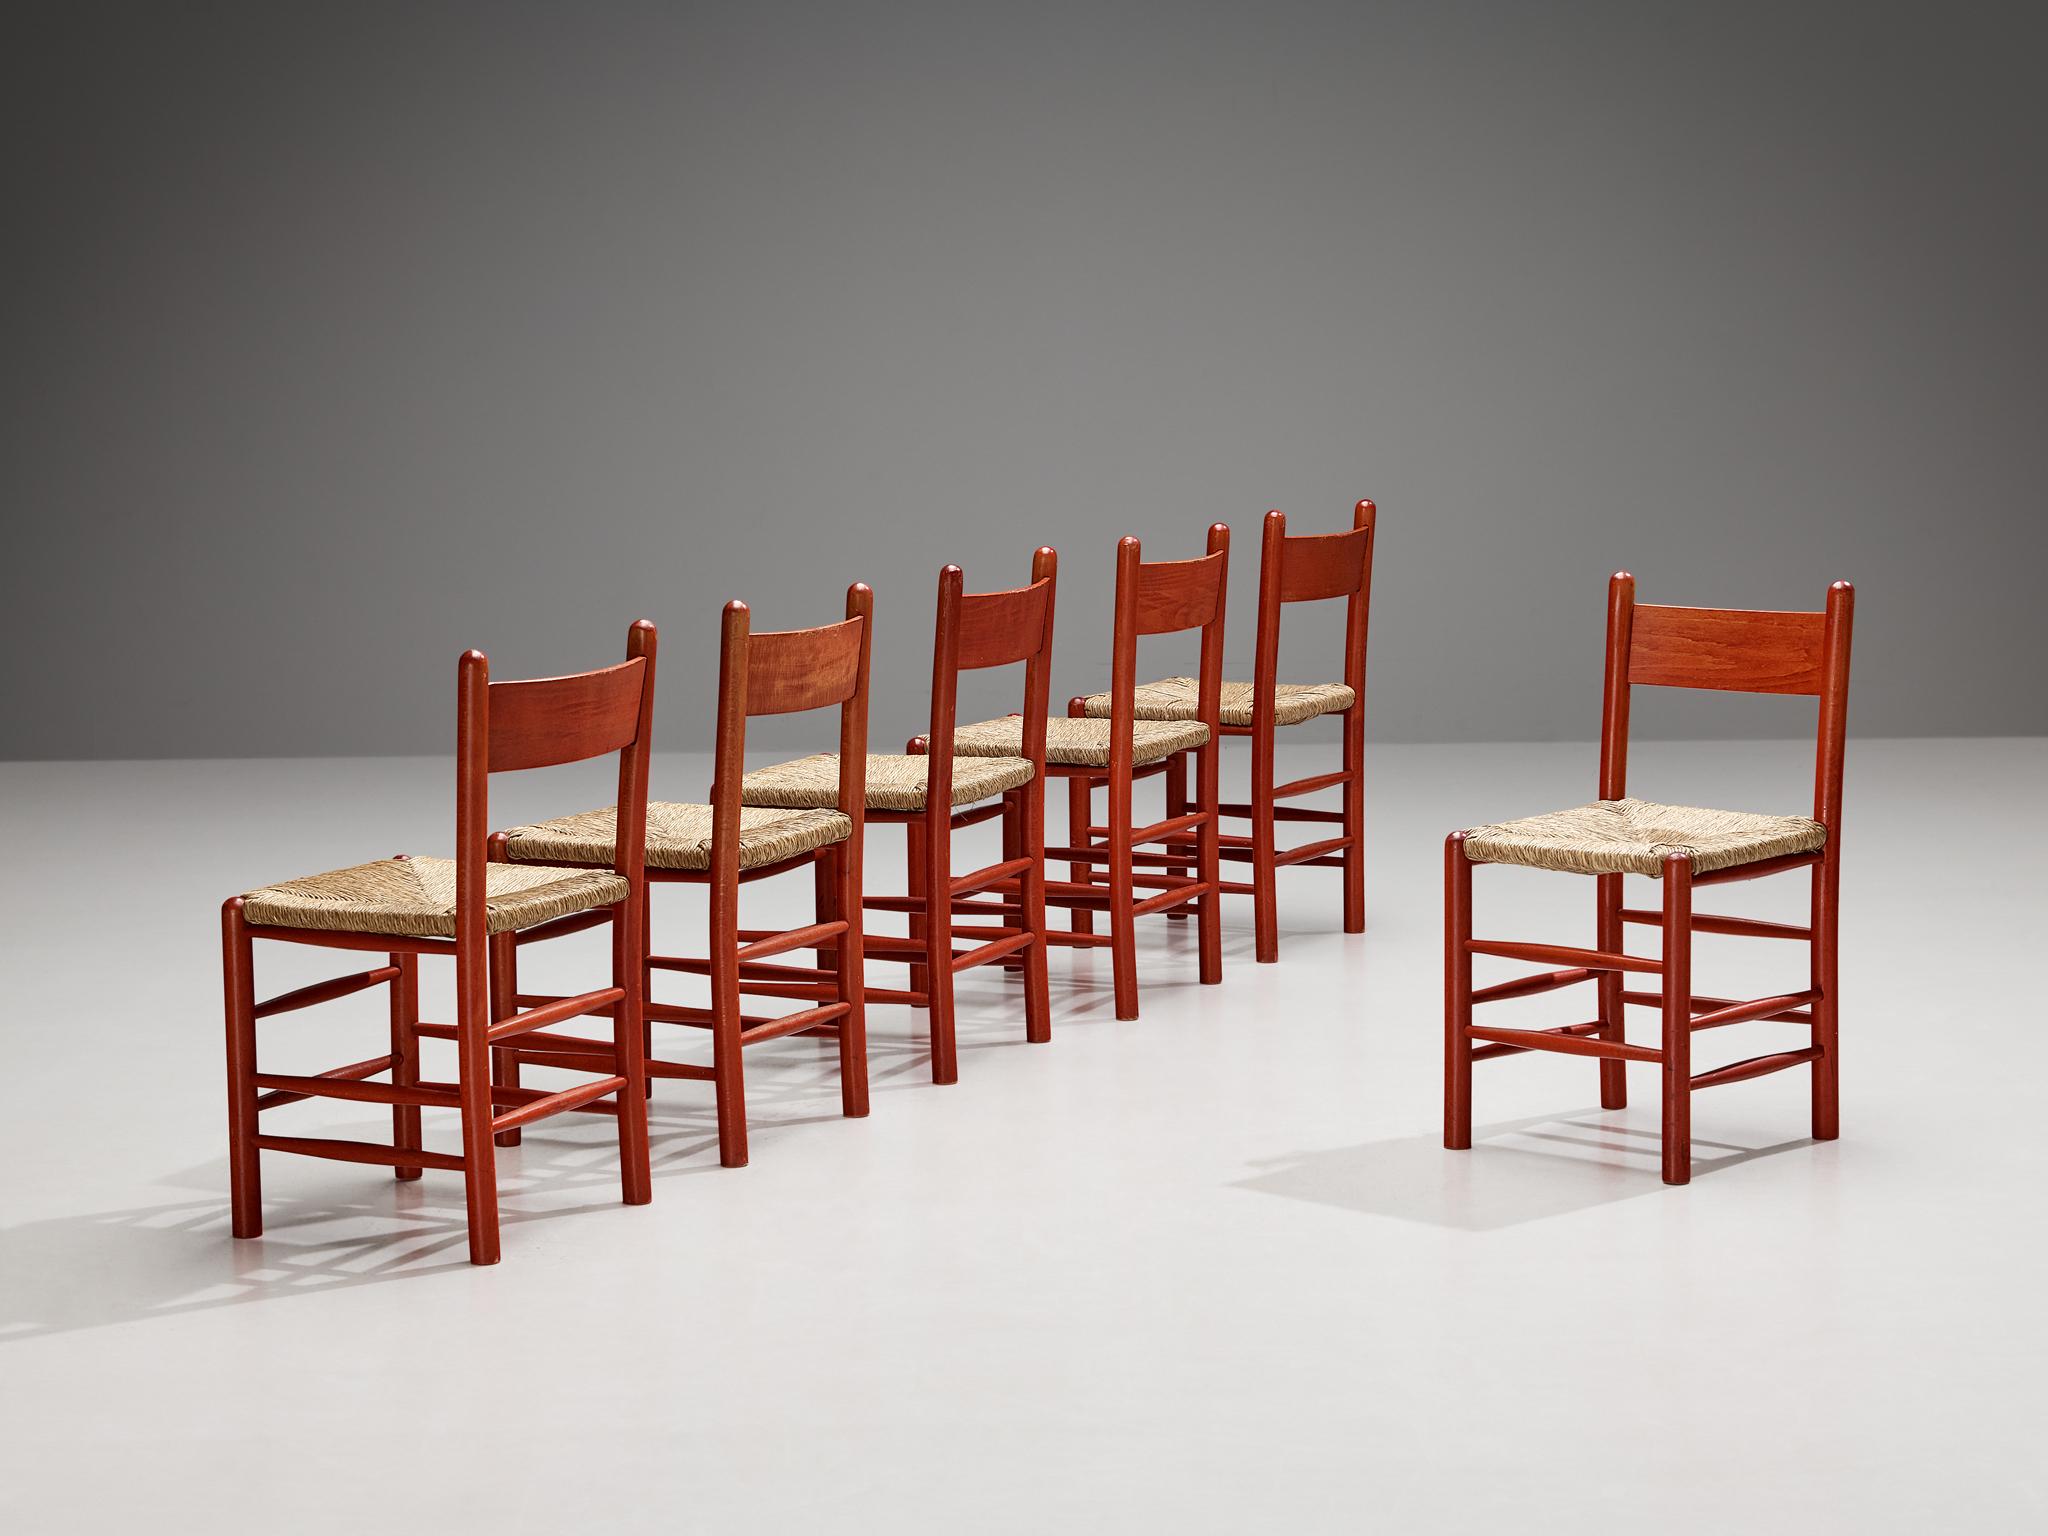 Set of six dining chairs, beech, straw, France, 1960s.

Stunning set of French chairs with red beech frames and classic organic straw seats. This set of six dining chairs features a solid wooden frame, consisting of cylindrical thick legs that are